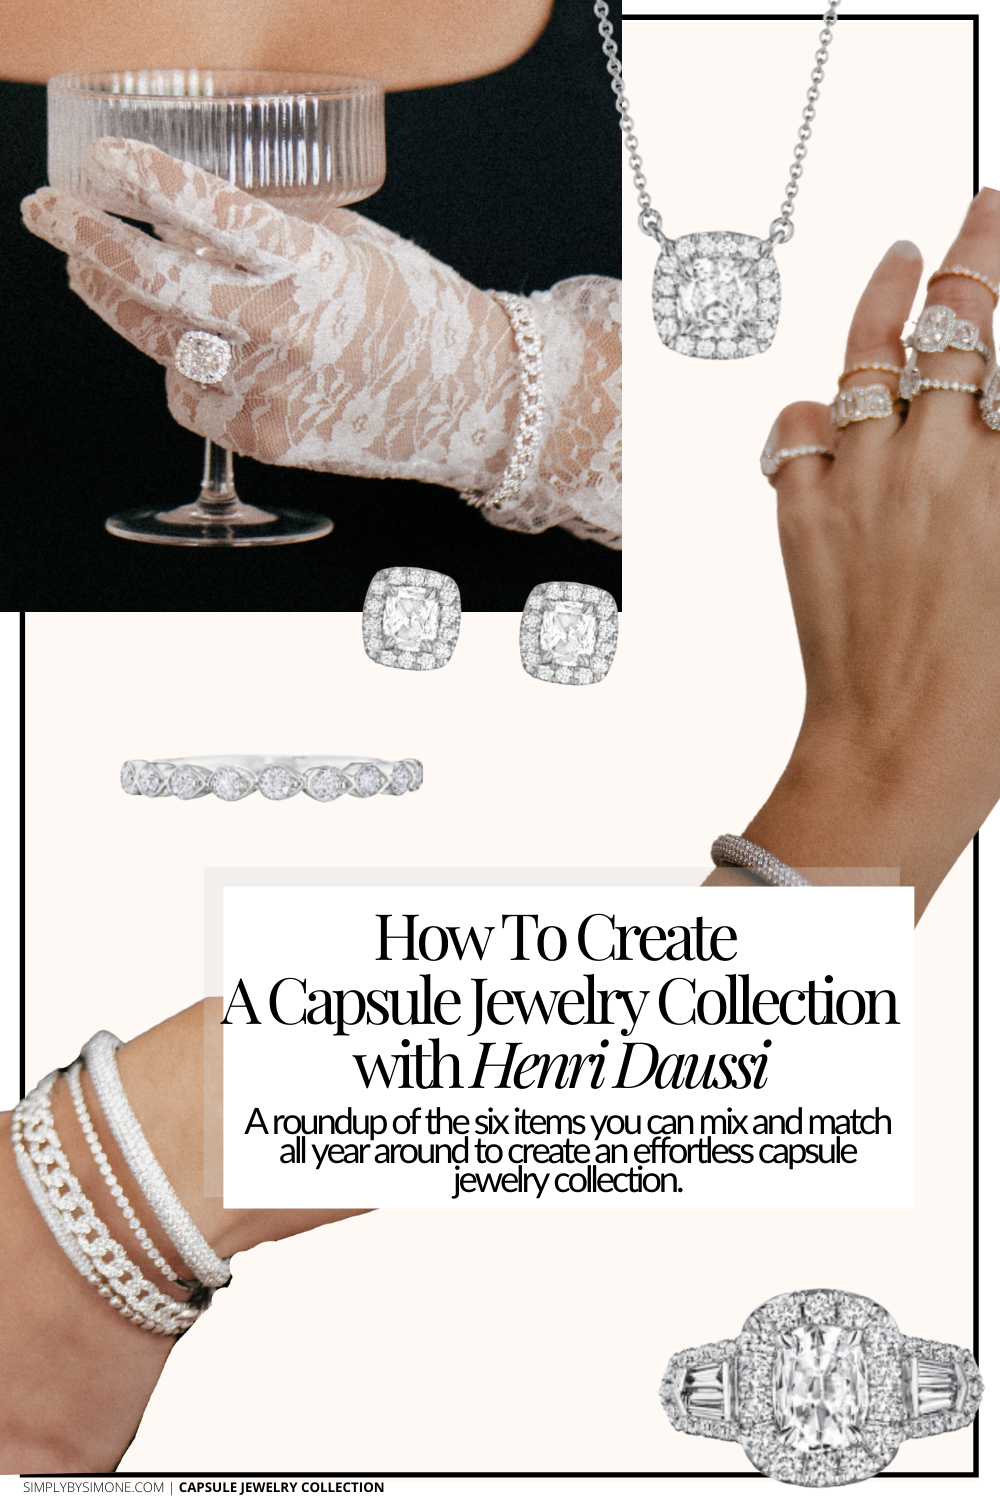 How To Create A Capsule Jewelry Collection with Henri Daussi